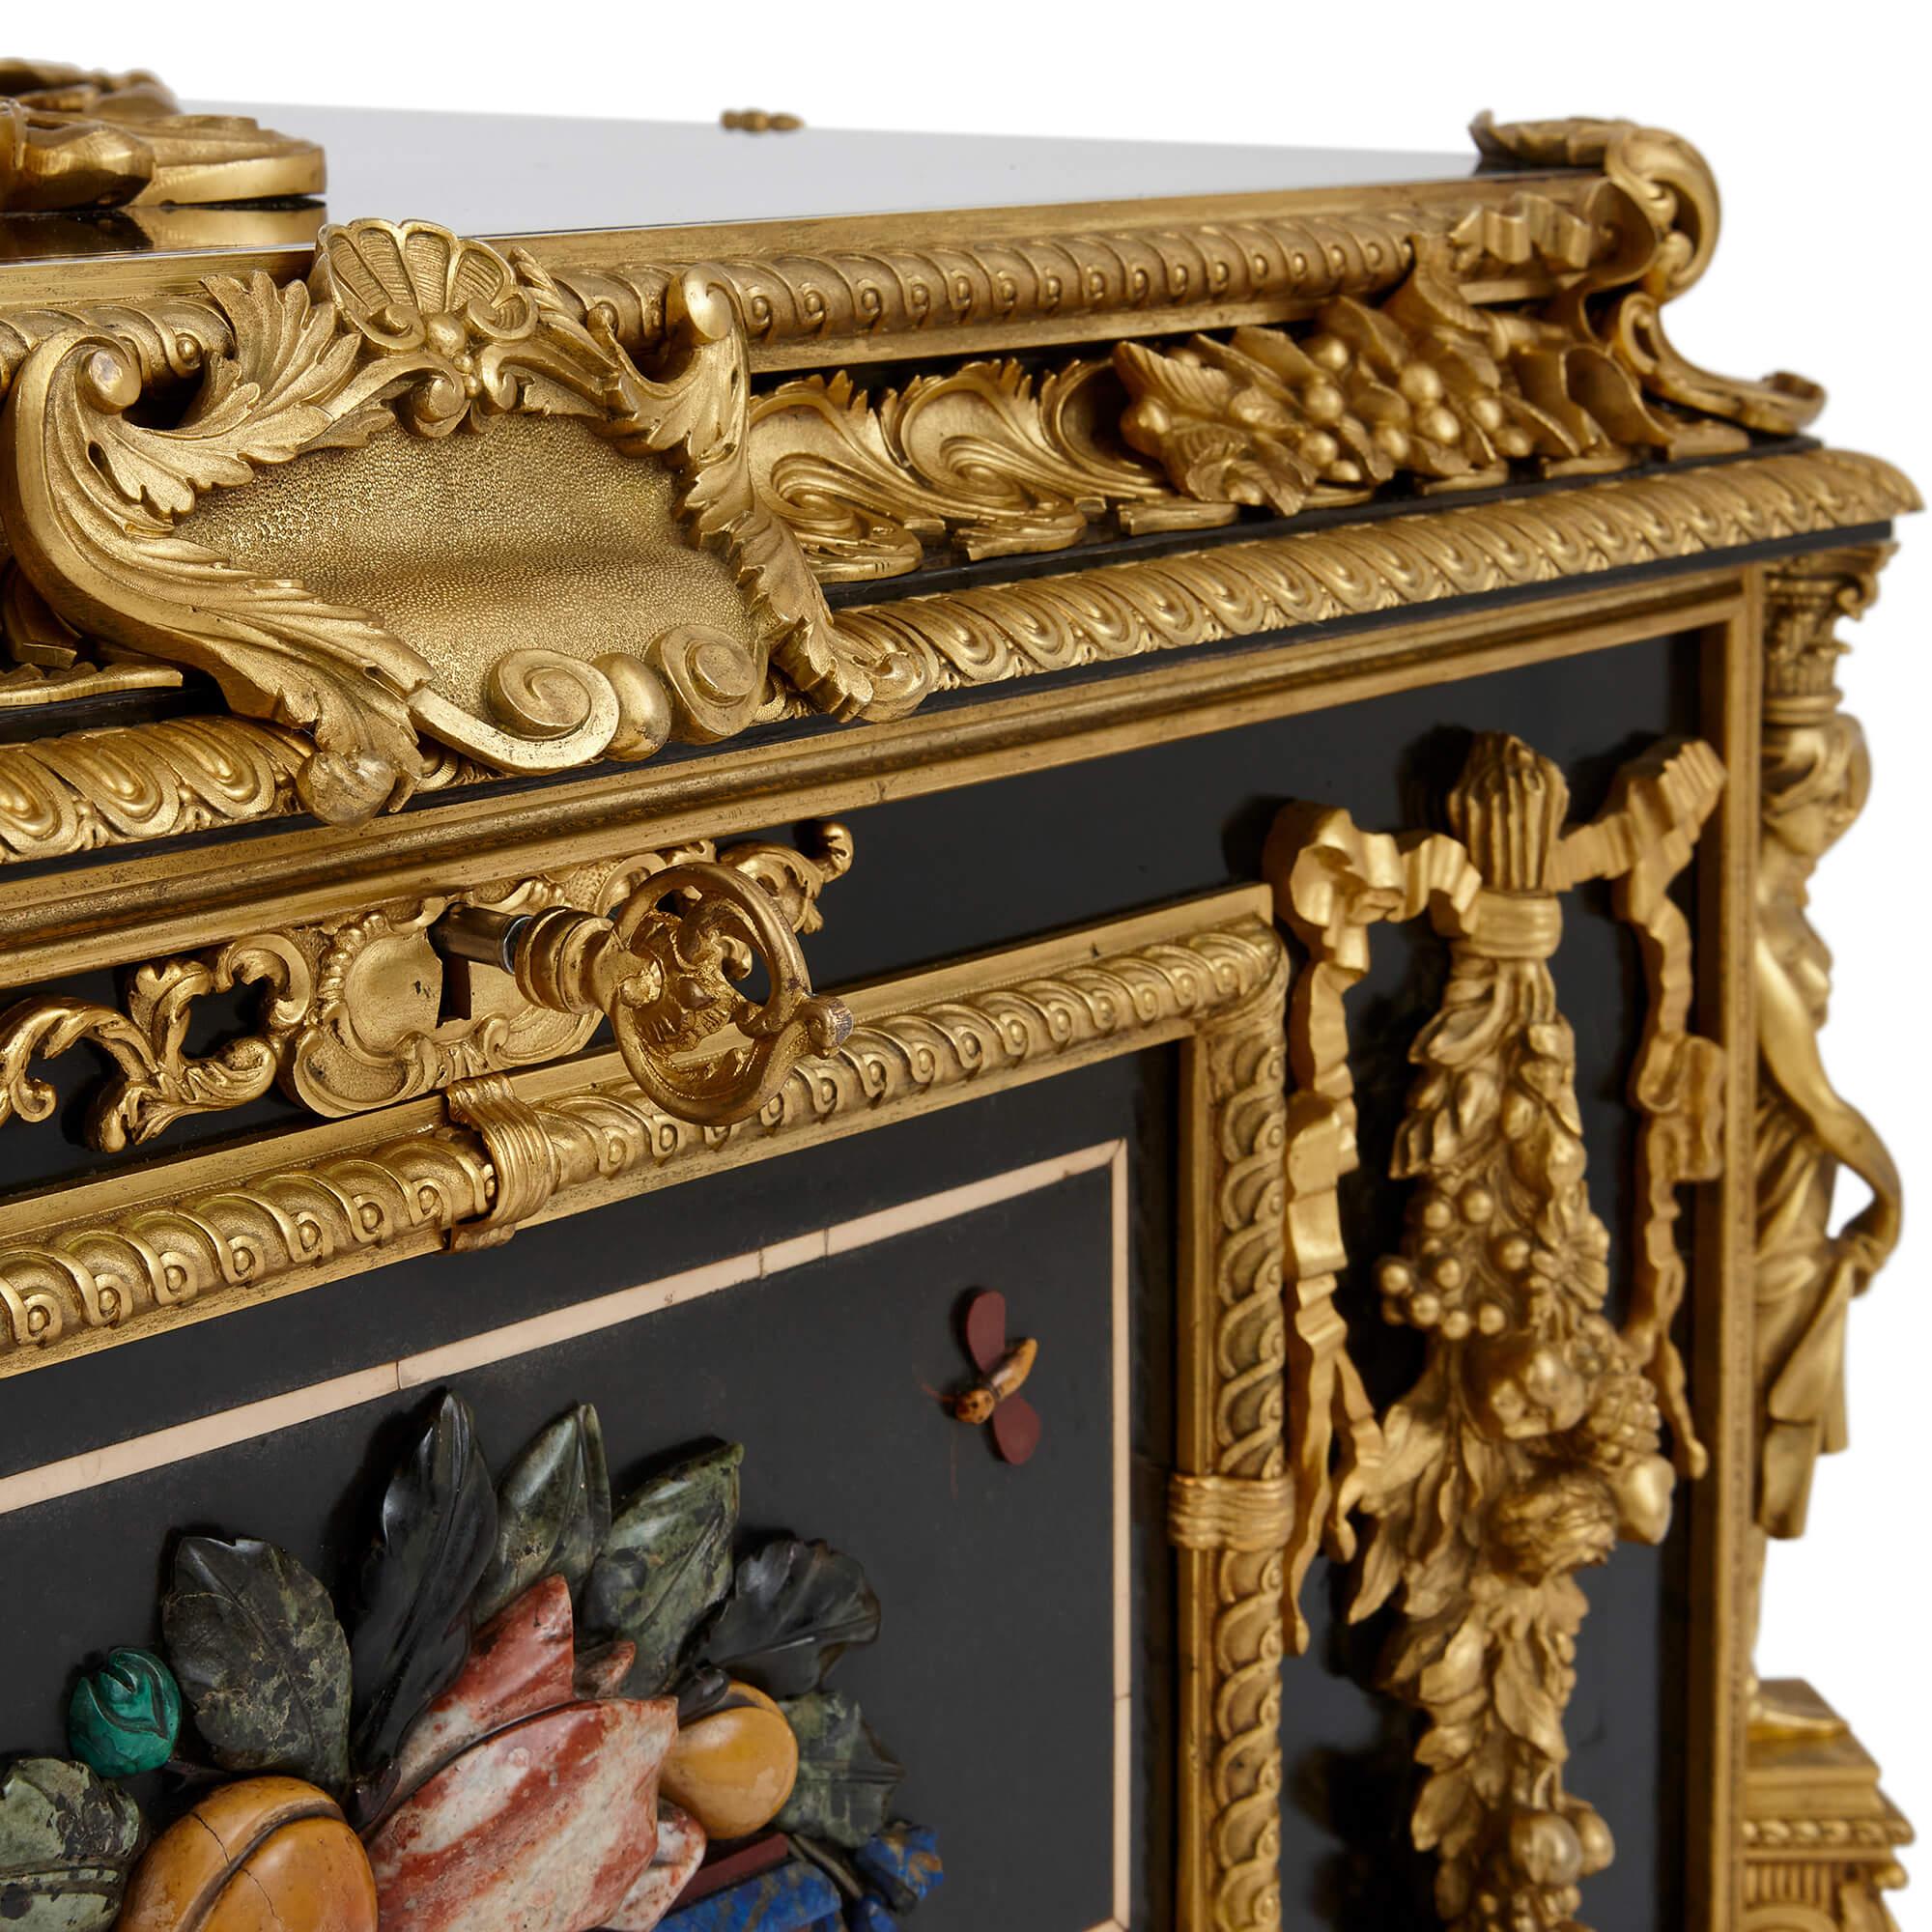 19th Century Magnificent and large ormolu and hardstone Regency period ebonized wooden casket For Sale